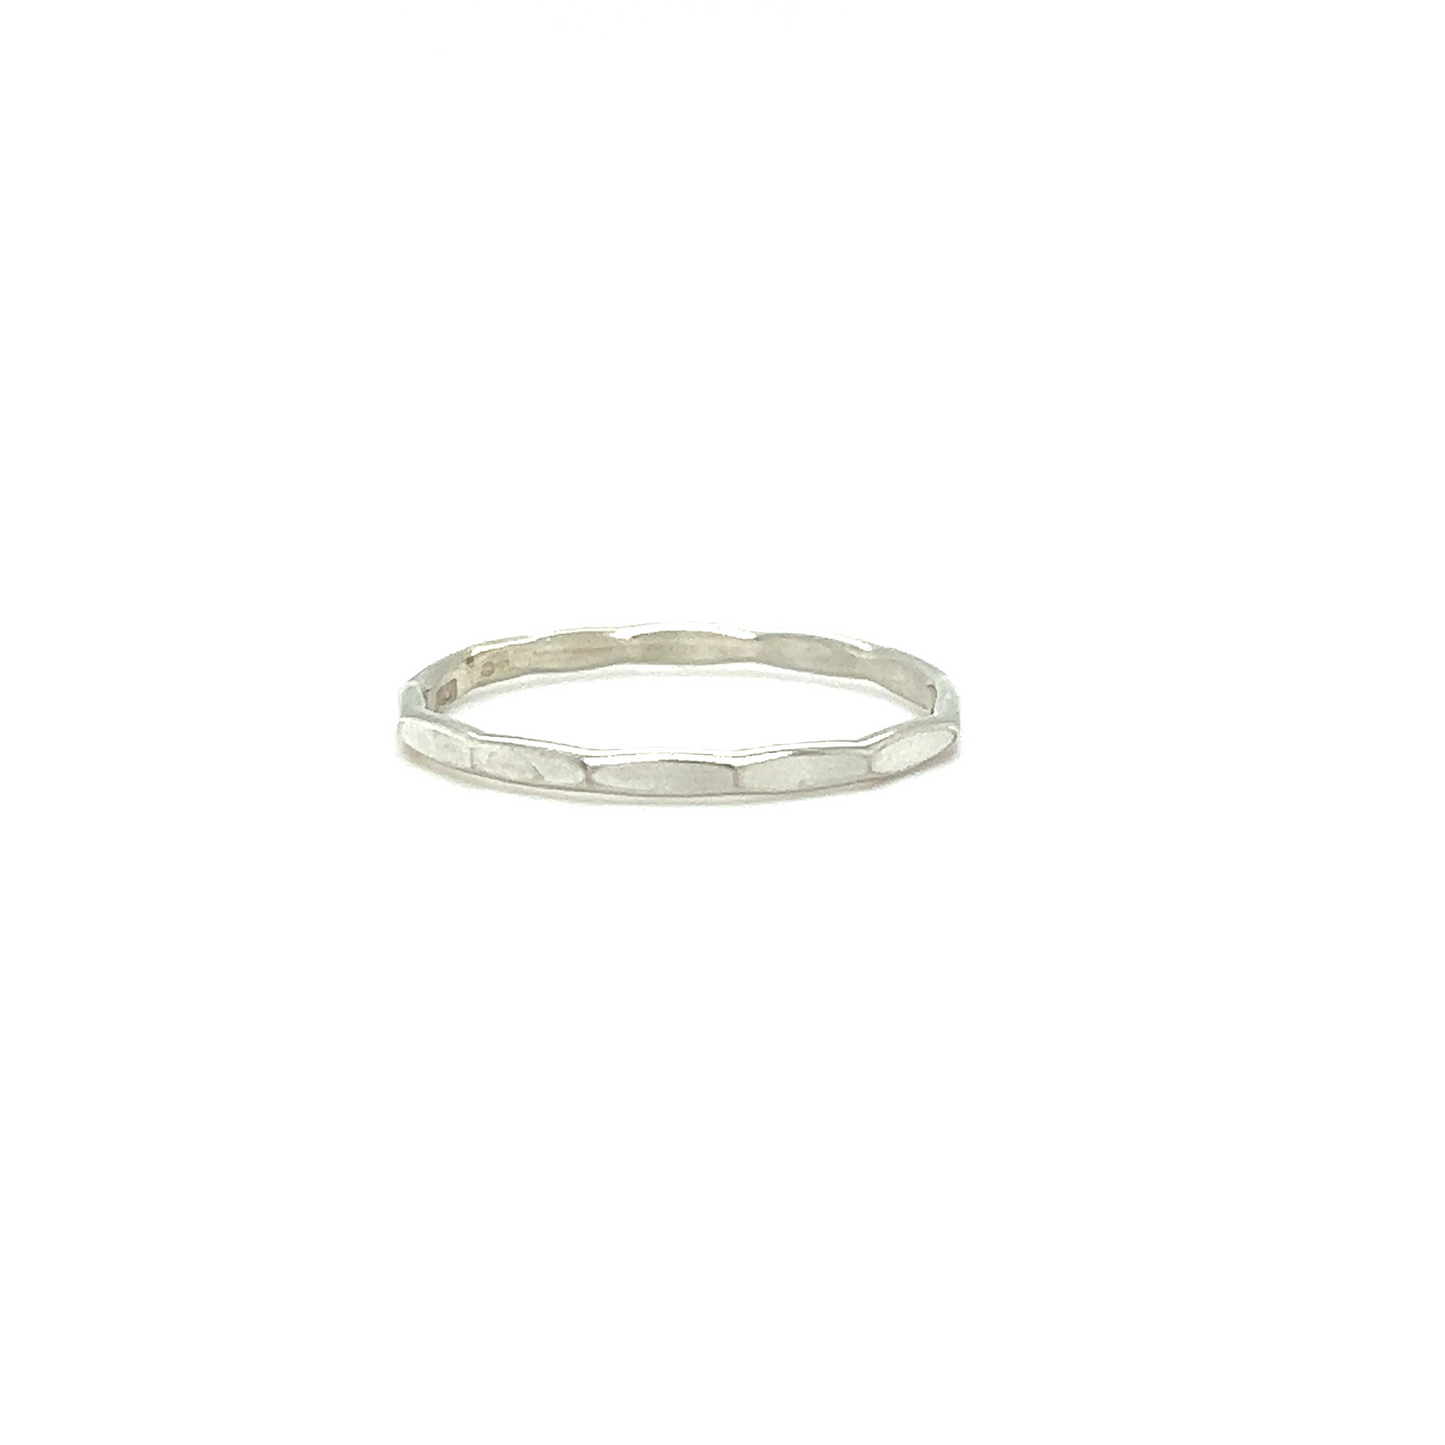 A Diamond Cut Minimalist Silver Band with a curved edge on a white background.